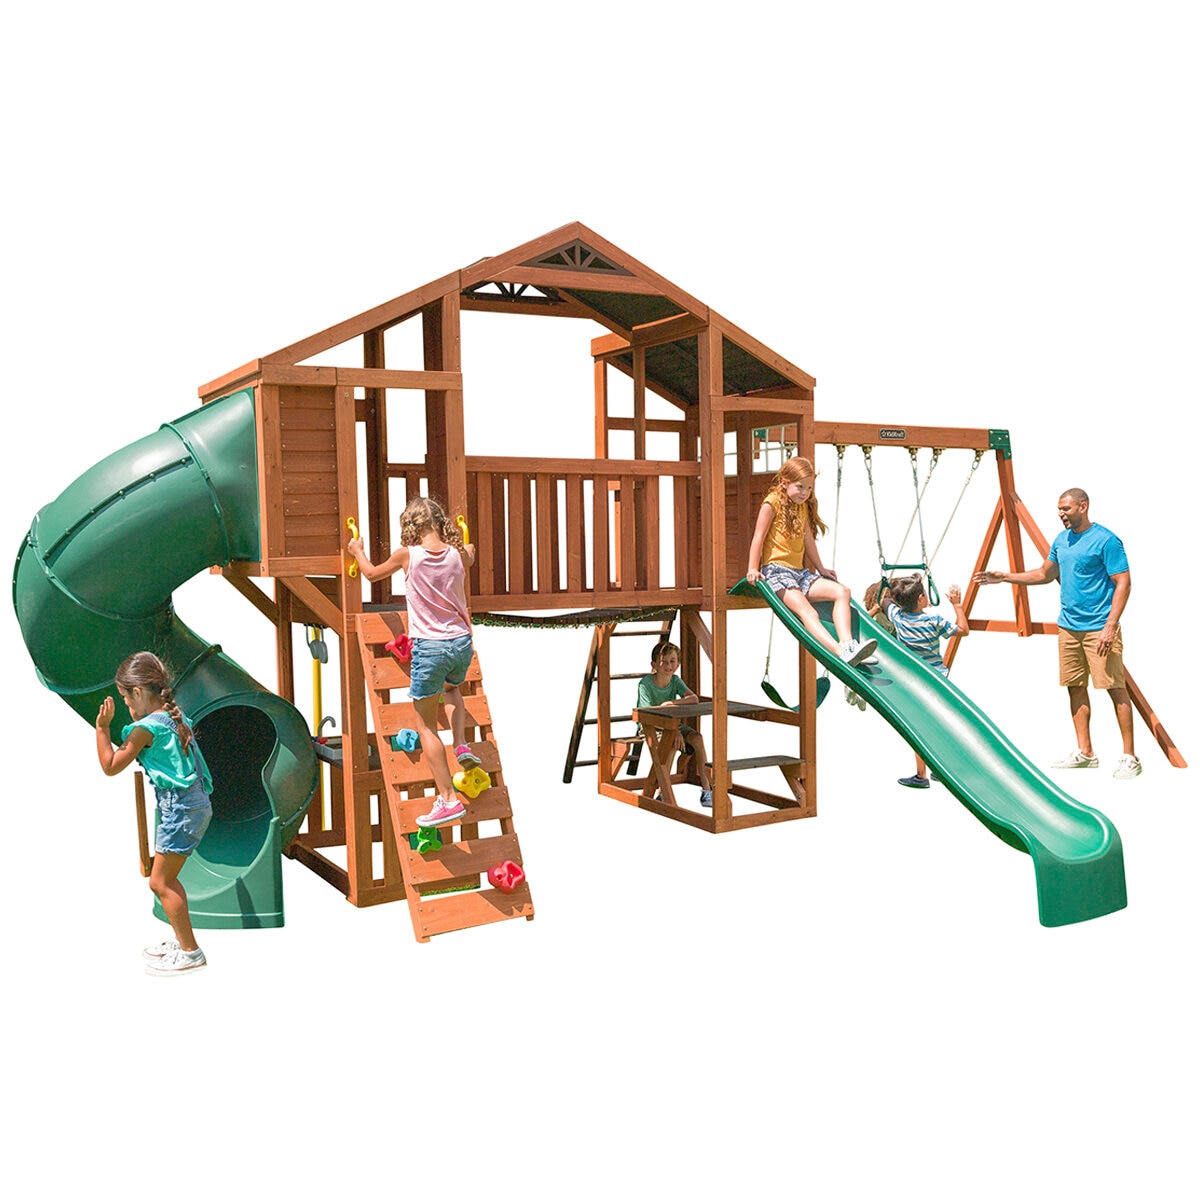 KidKraft Boulder Bluff 2 in 1 Wooden Playcentre and Swing Set